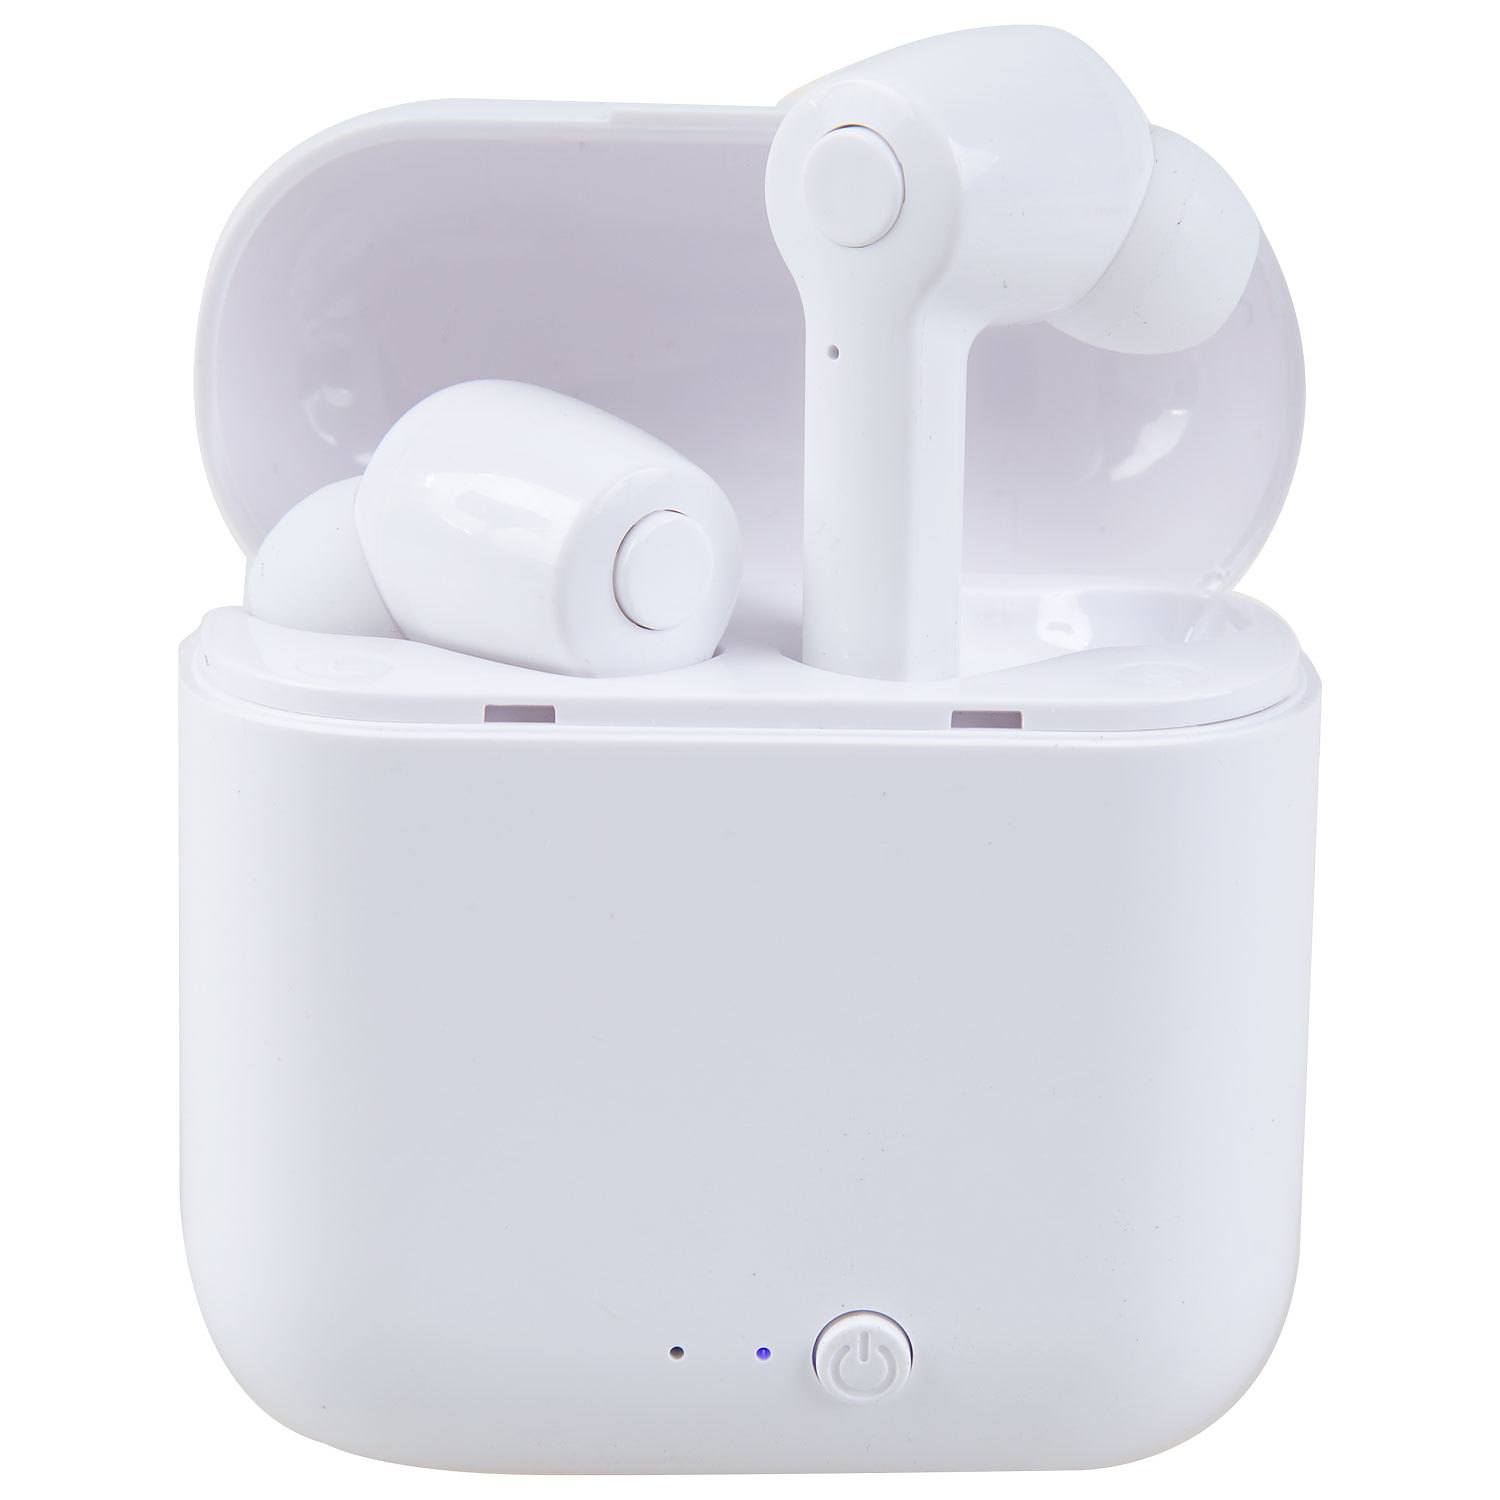 Bytech - True wireless earbuds with charging case, white